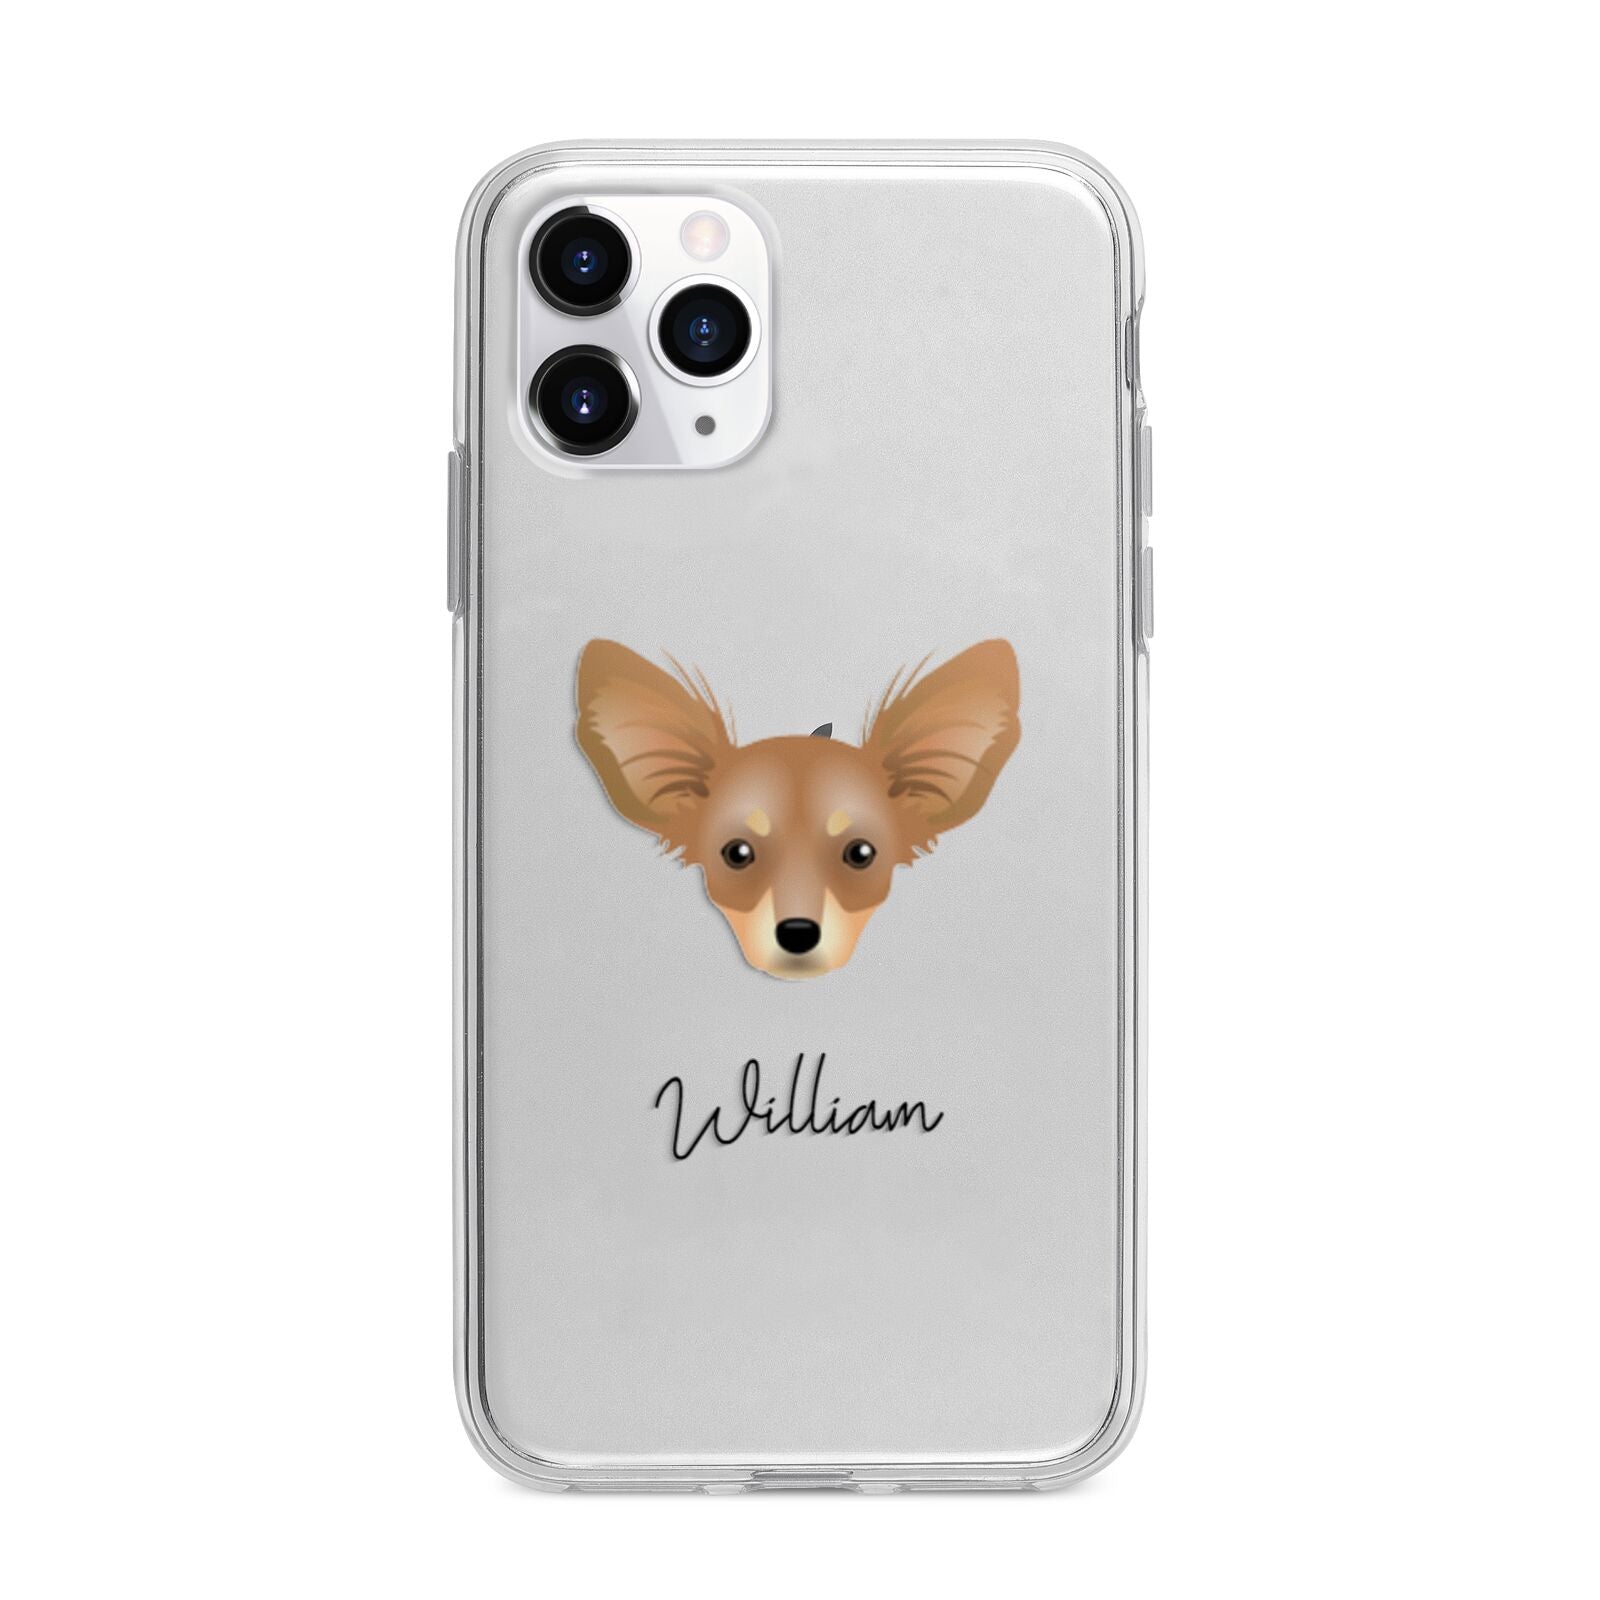 Russian Toy Personalised Apple iPhone 11 Pro in Silver with Bumper Case